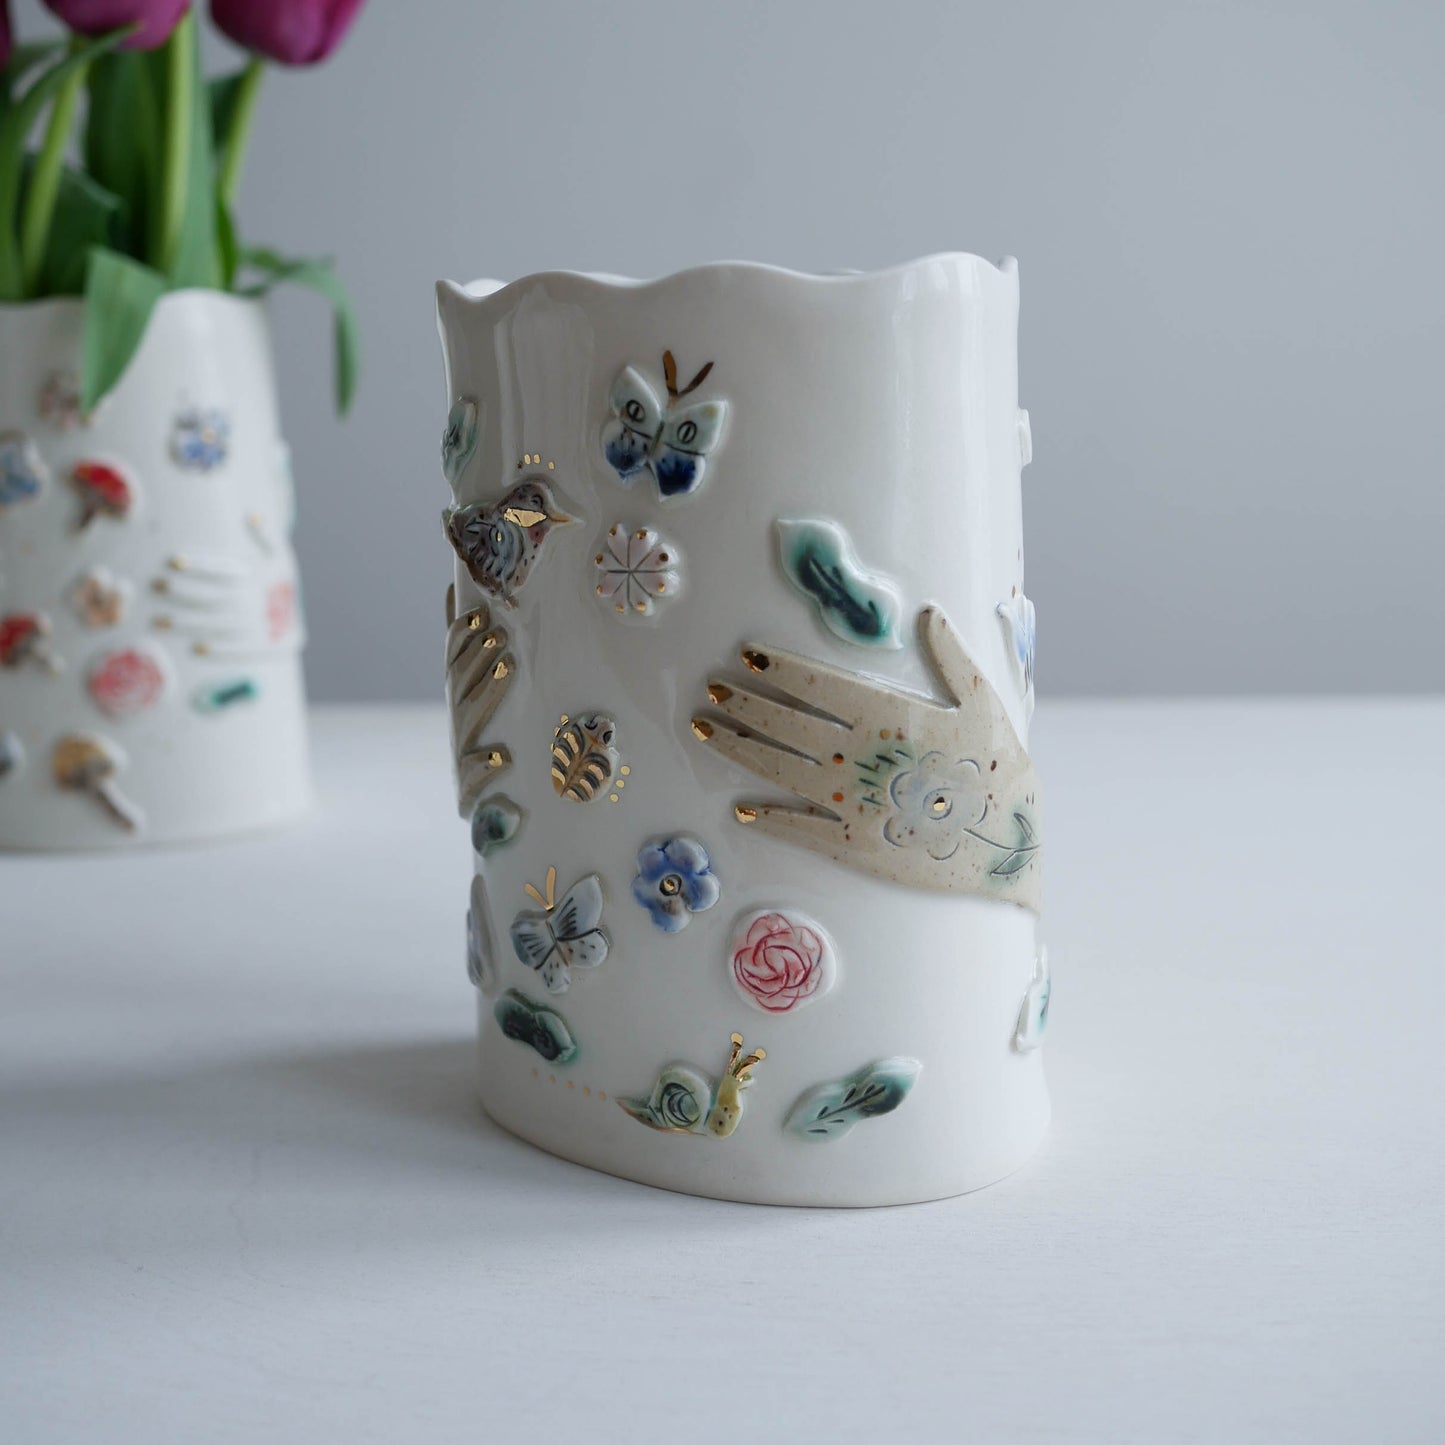 Vase * Bird perched on hand with garden insects #6